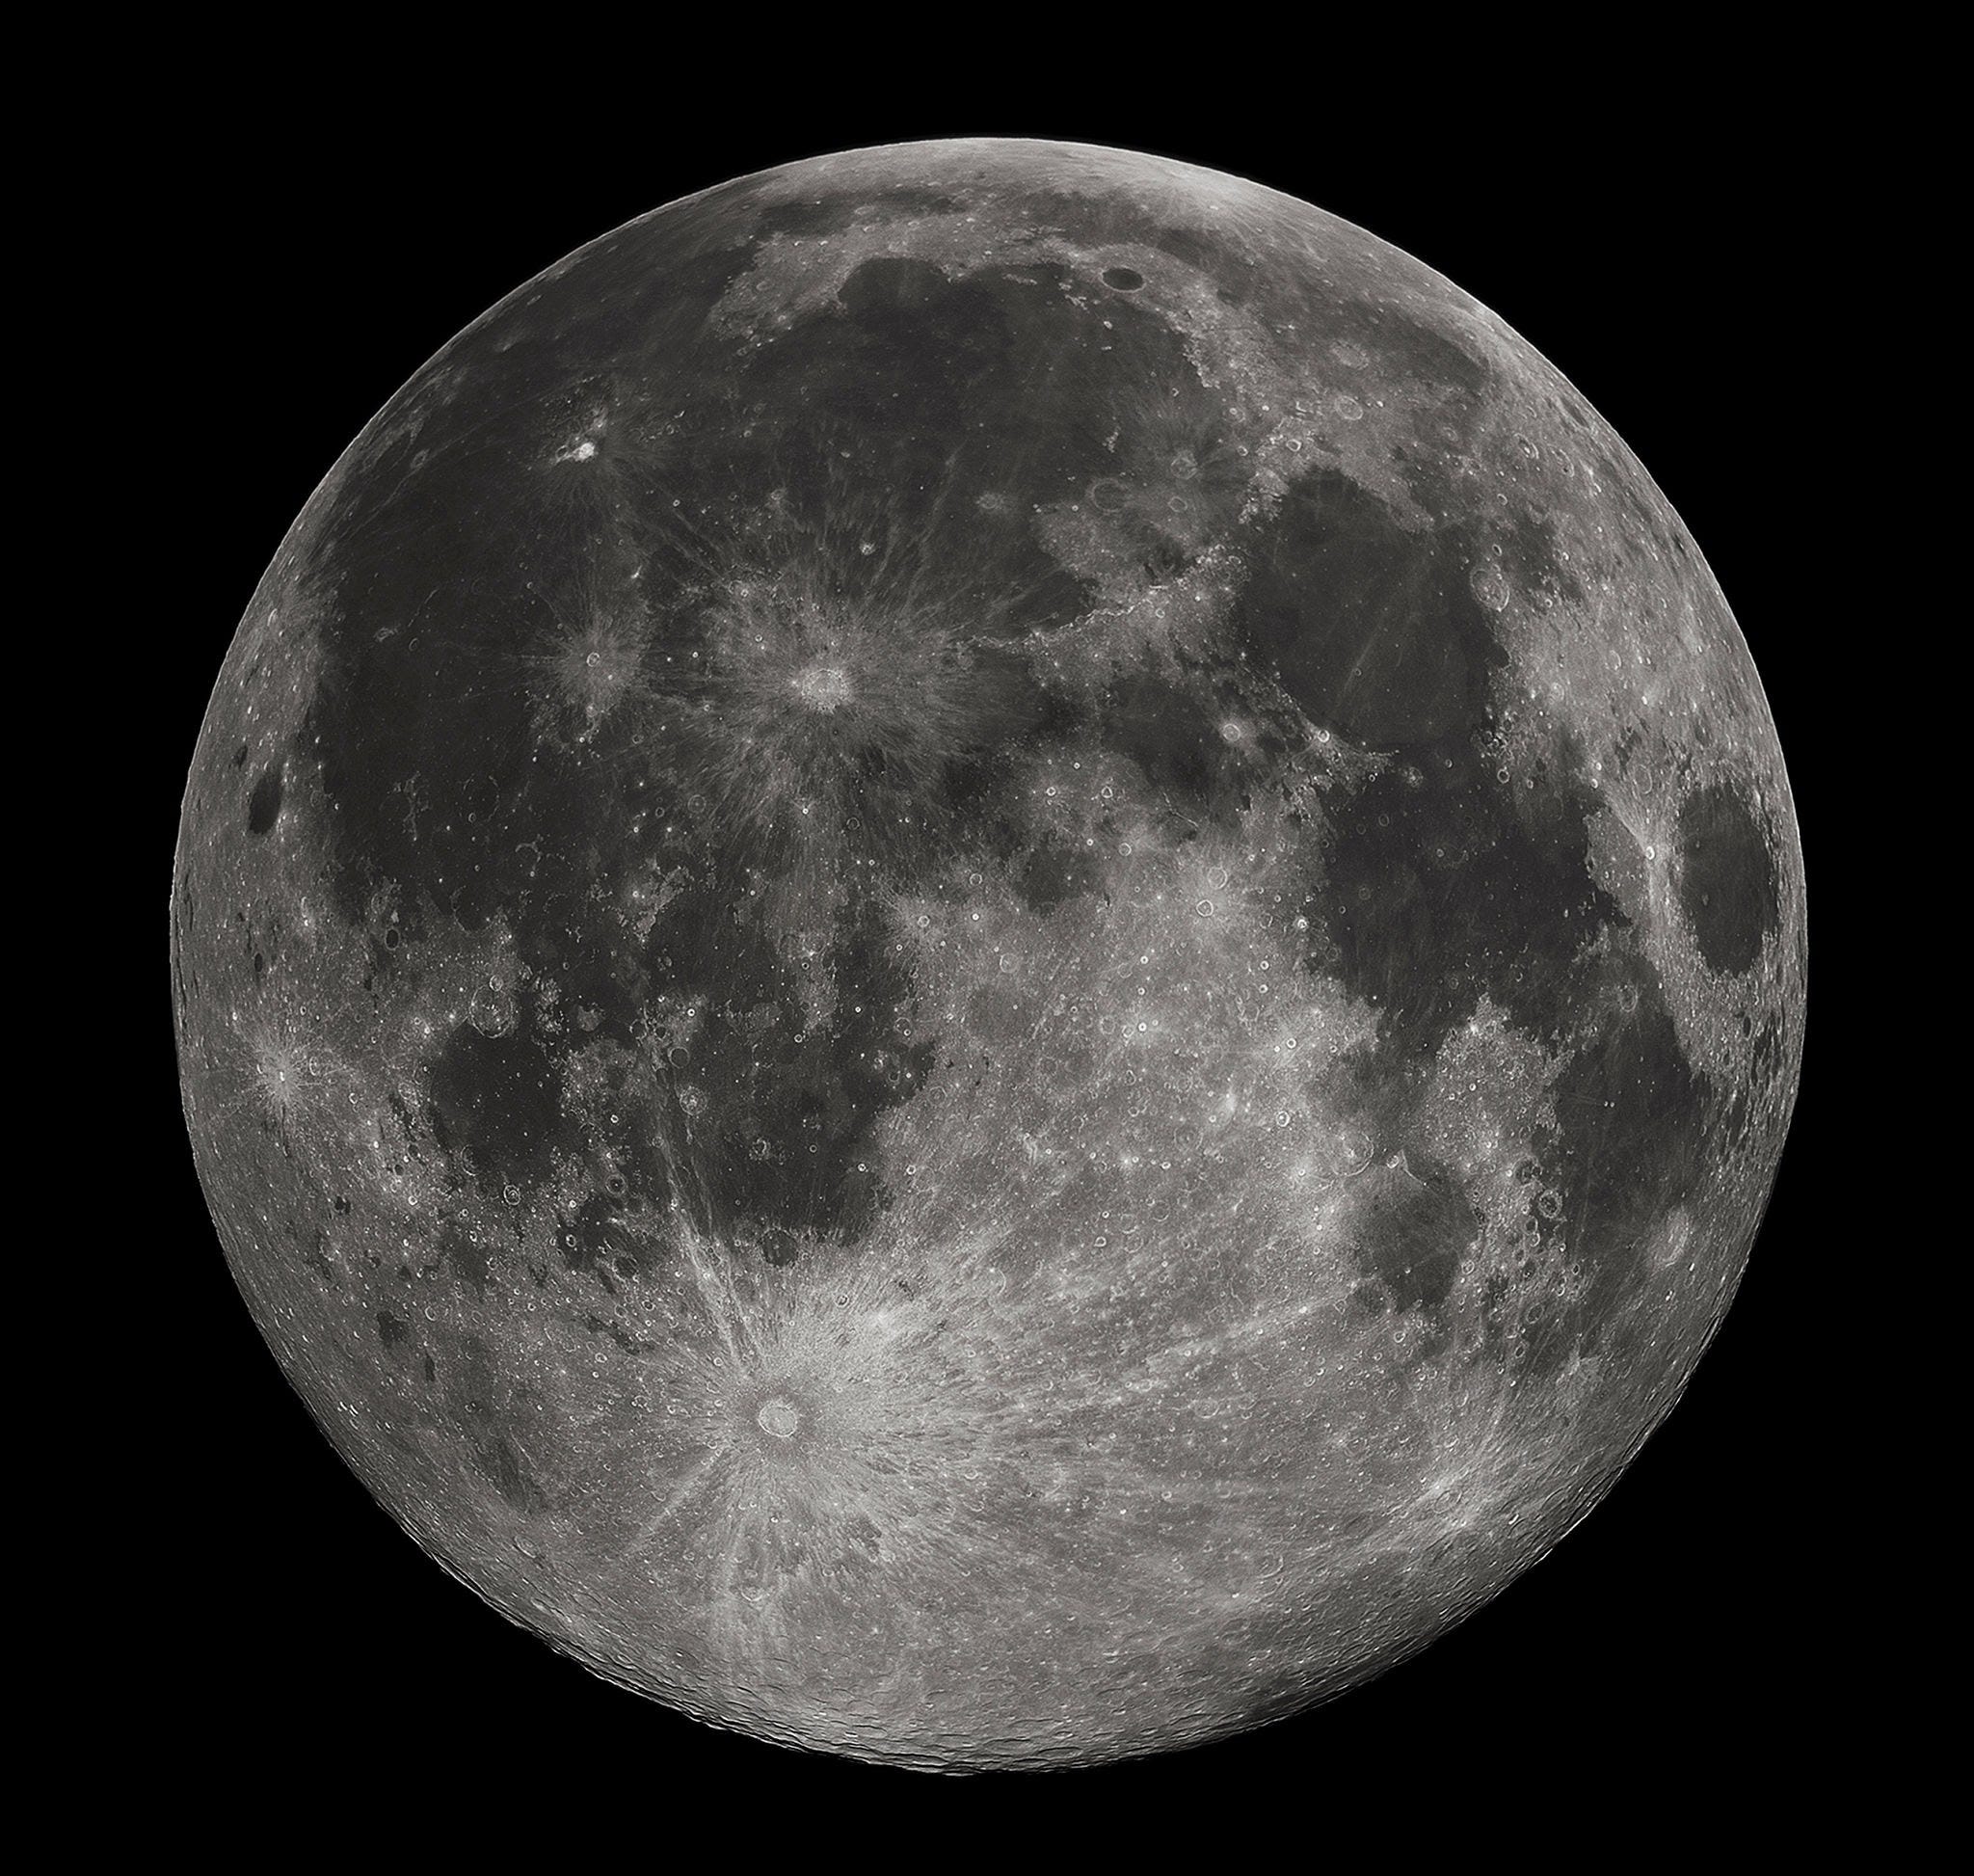 The Moon: Earth’s Only Natural Satellite